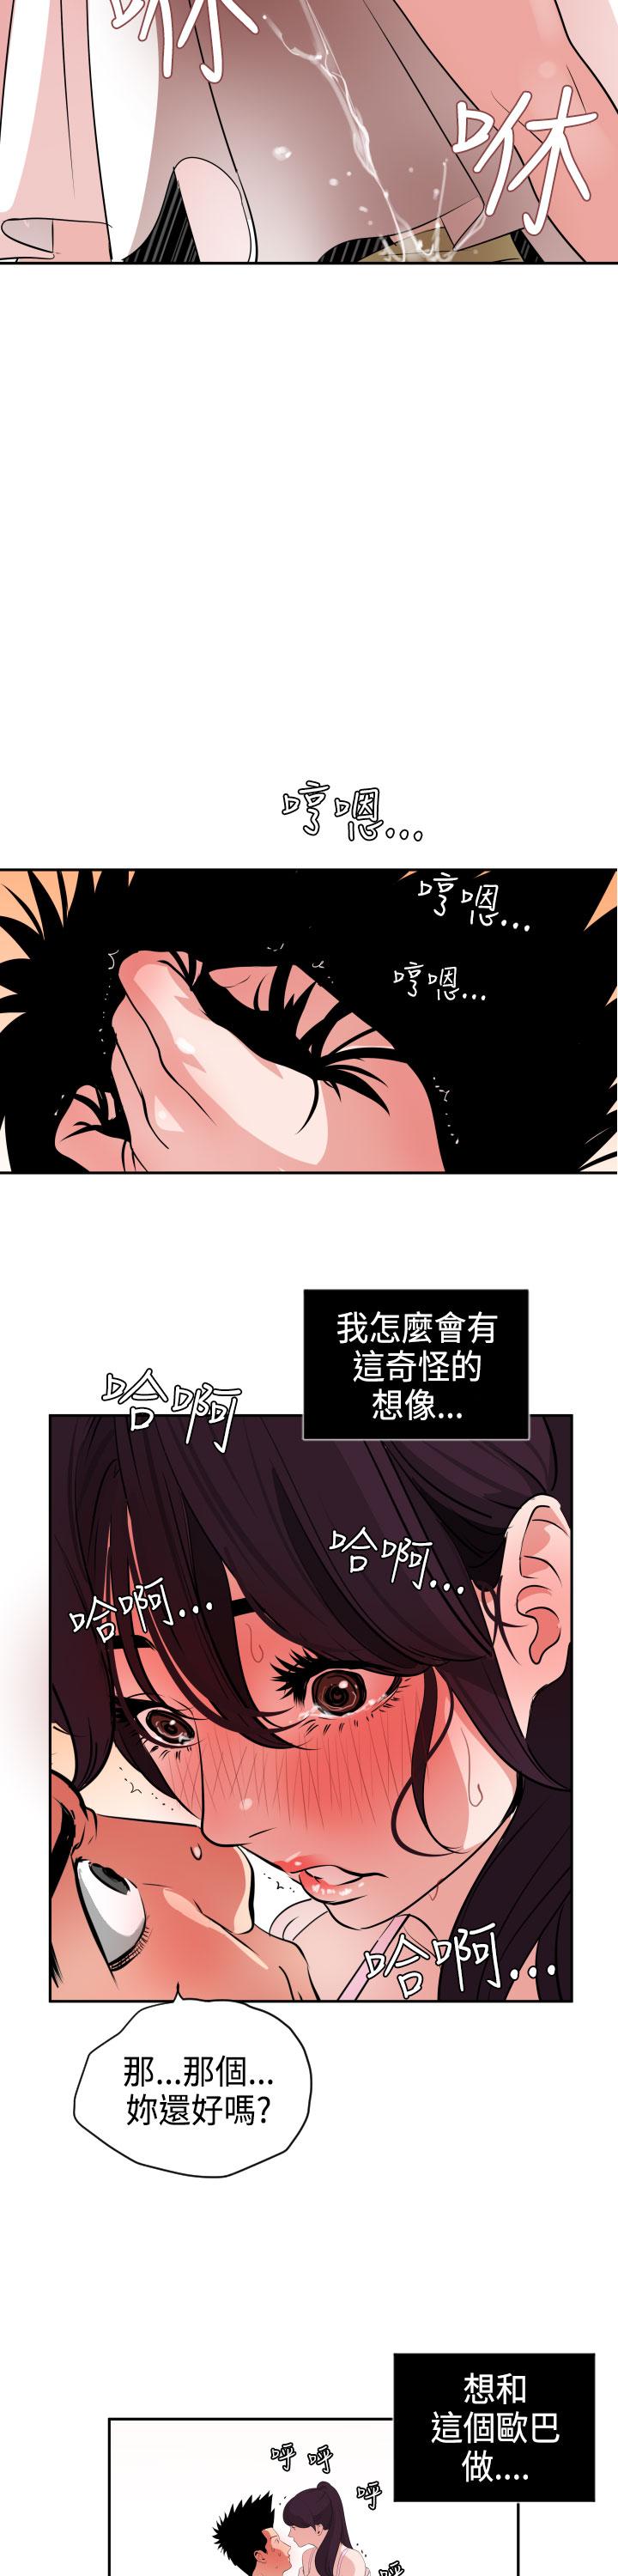 Desire King (慾求王) Ch.1-12 (chinese) 356